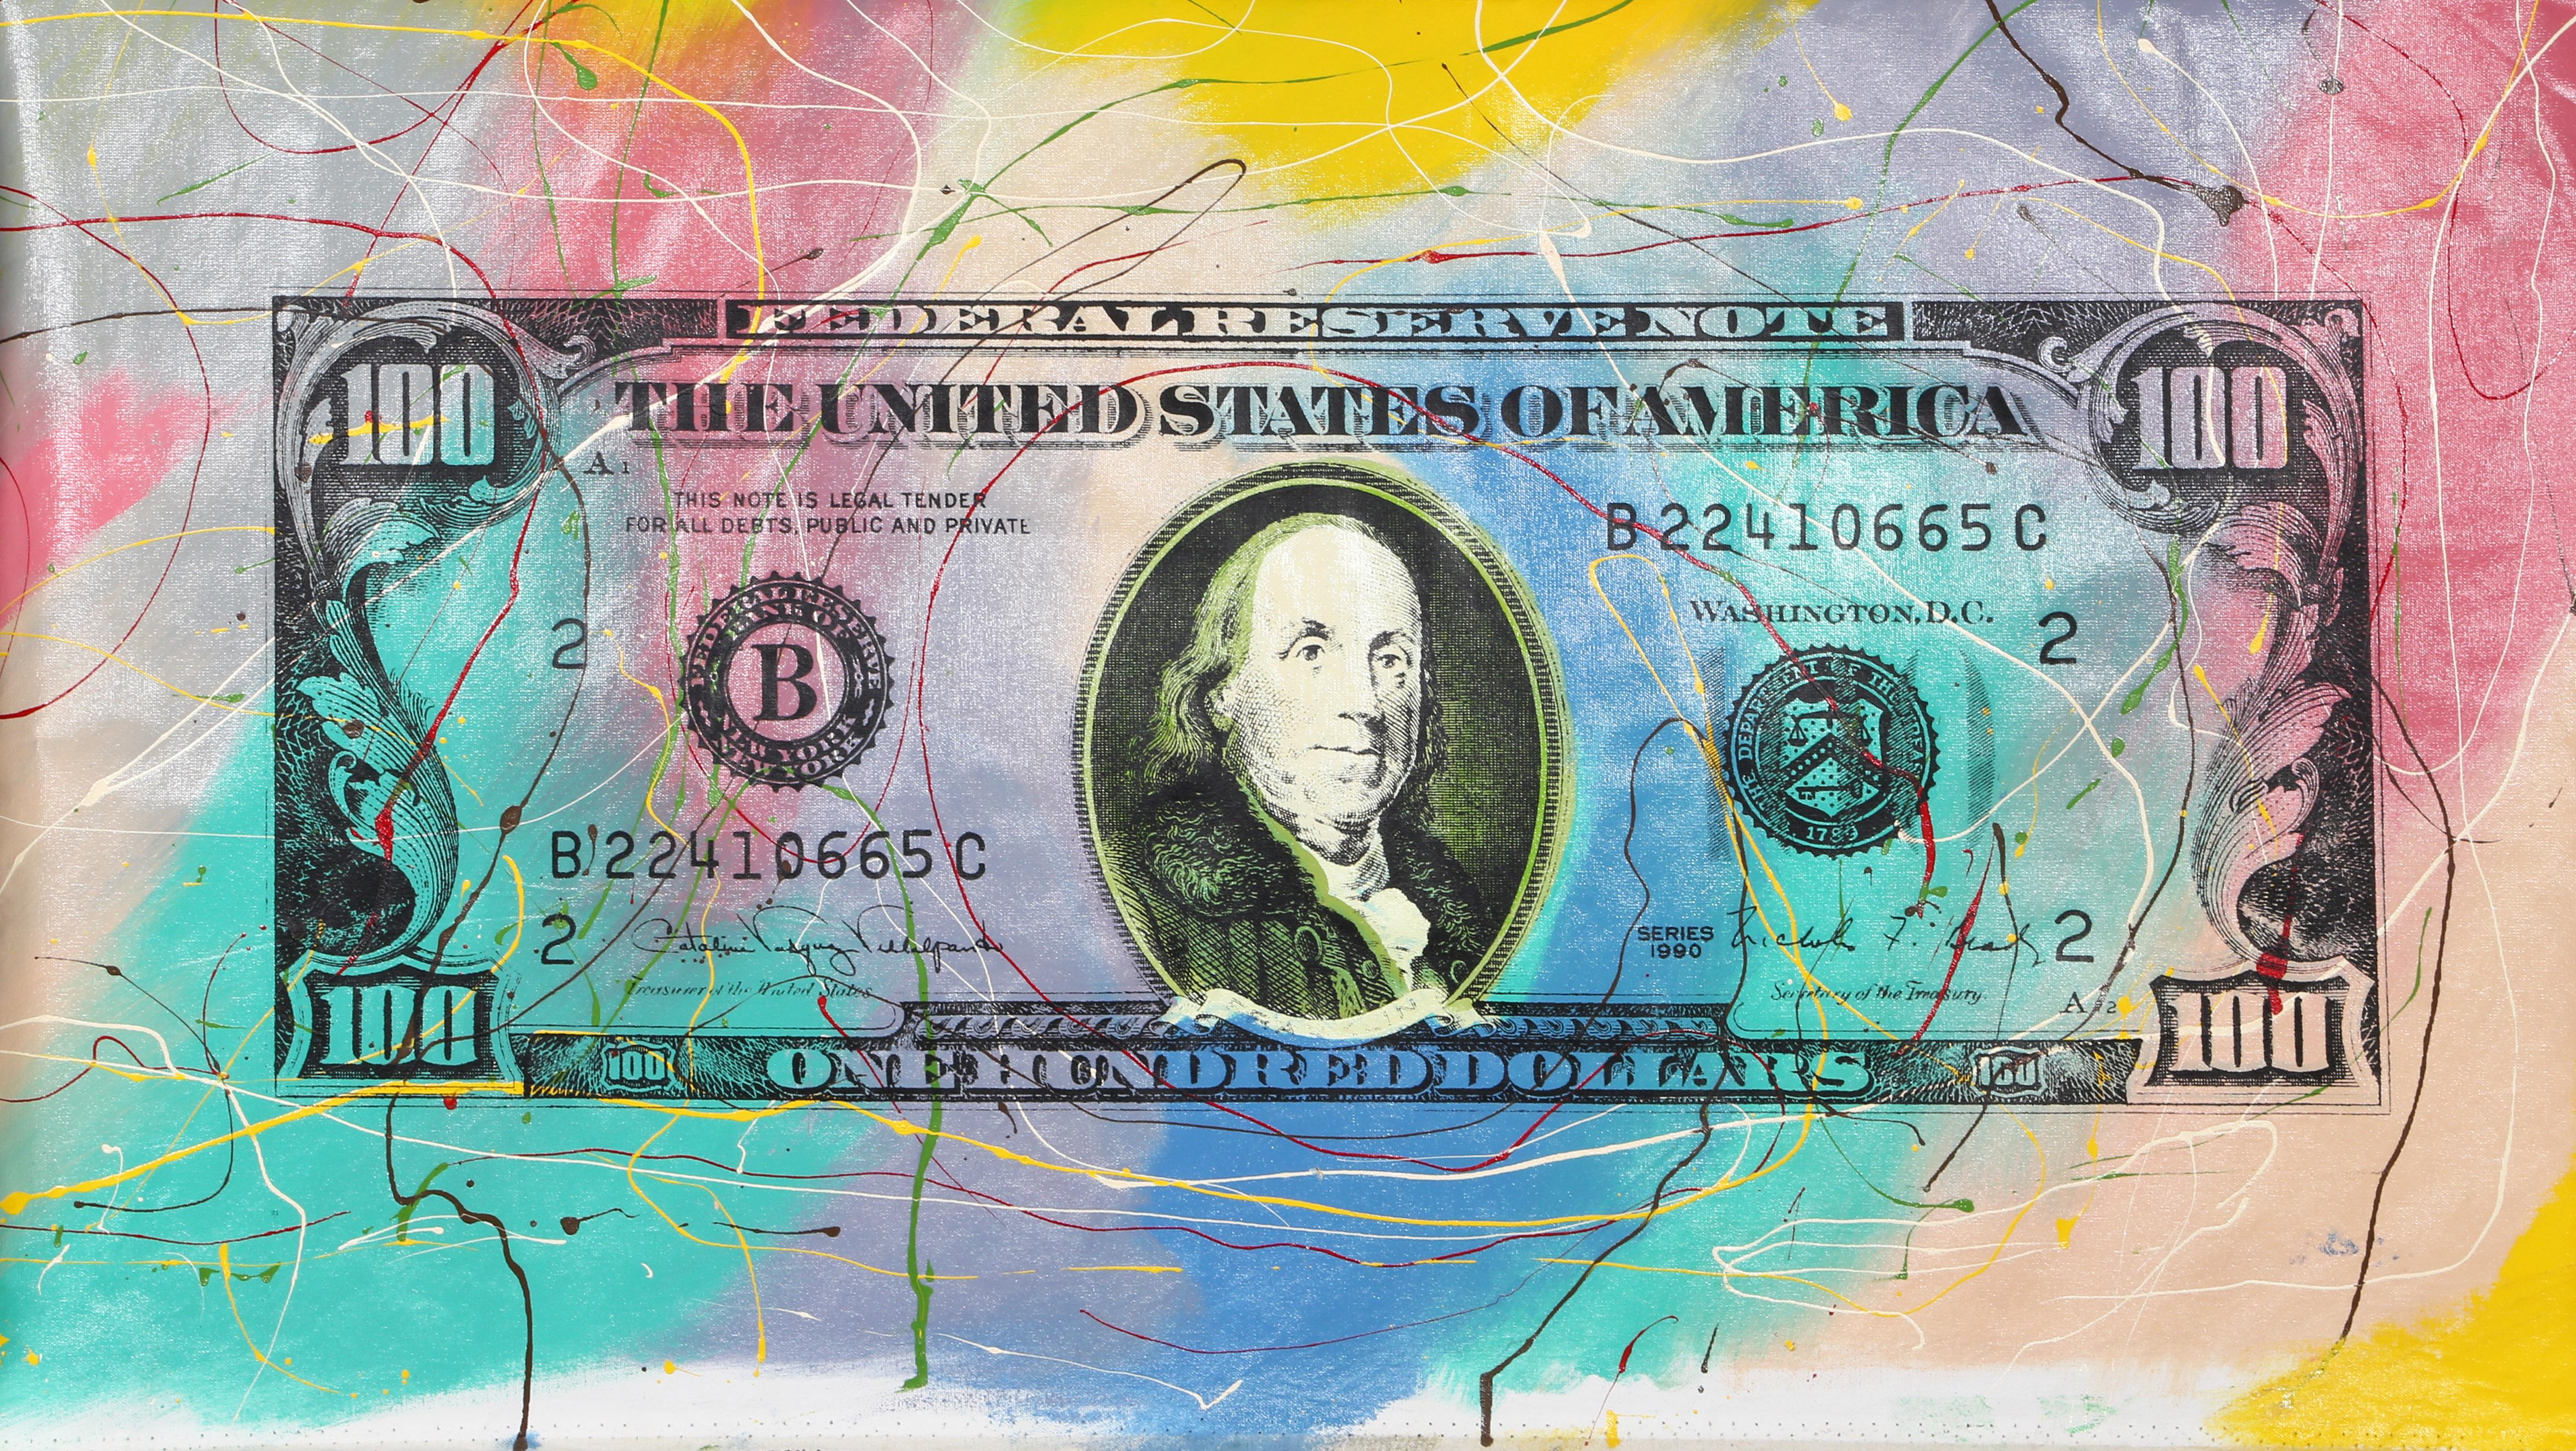 A Pop Art screenprint composition on canvas by Steve Kaufman. This bright work features an image of the US one hundred dollar bill on the face side, showing an image of Benjamin Franklin. The piece is signed and numbered in marker on the